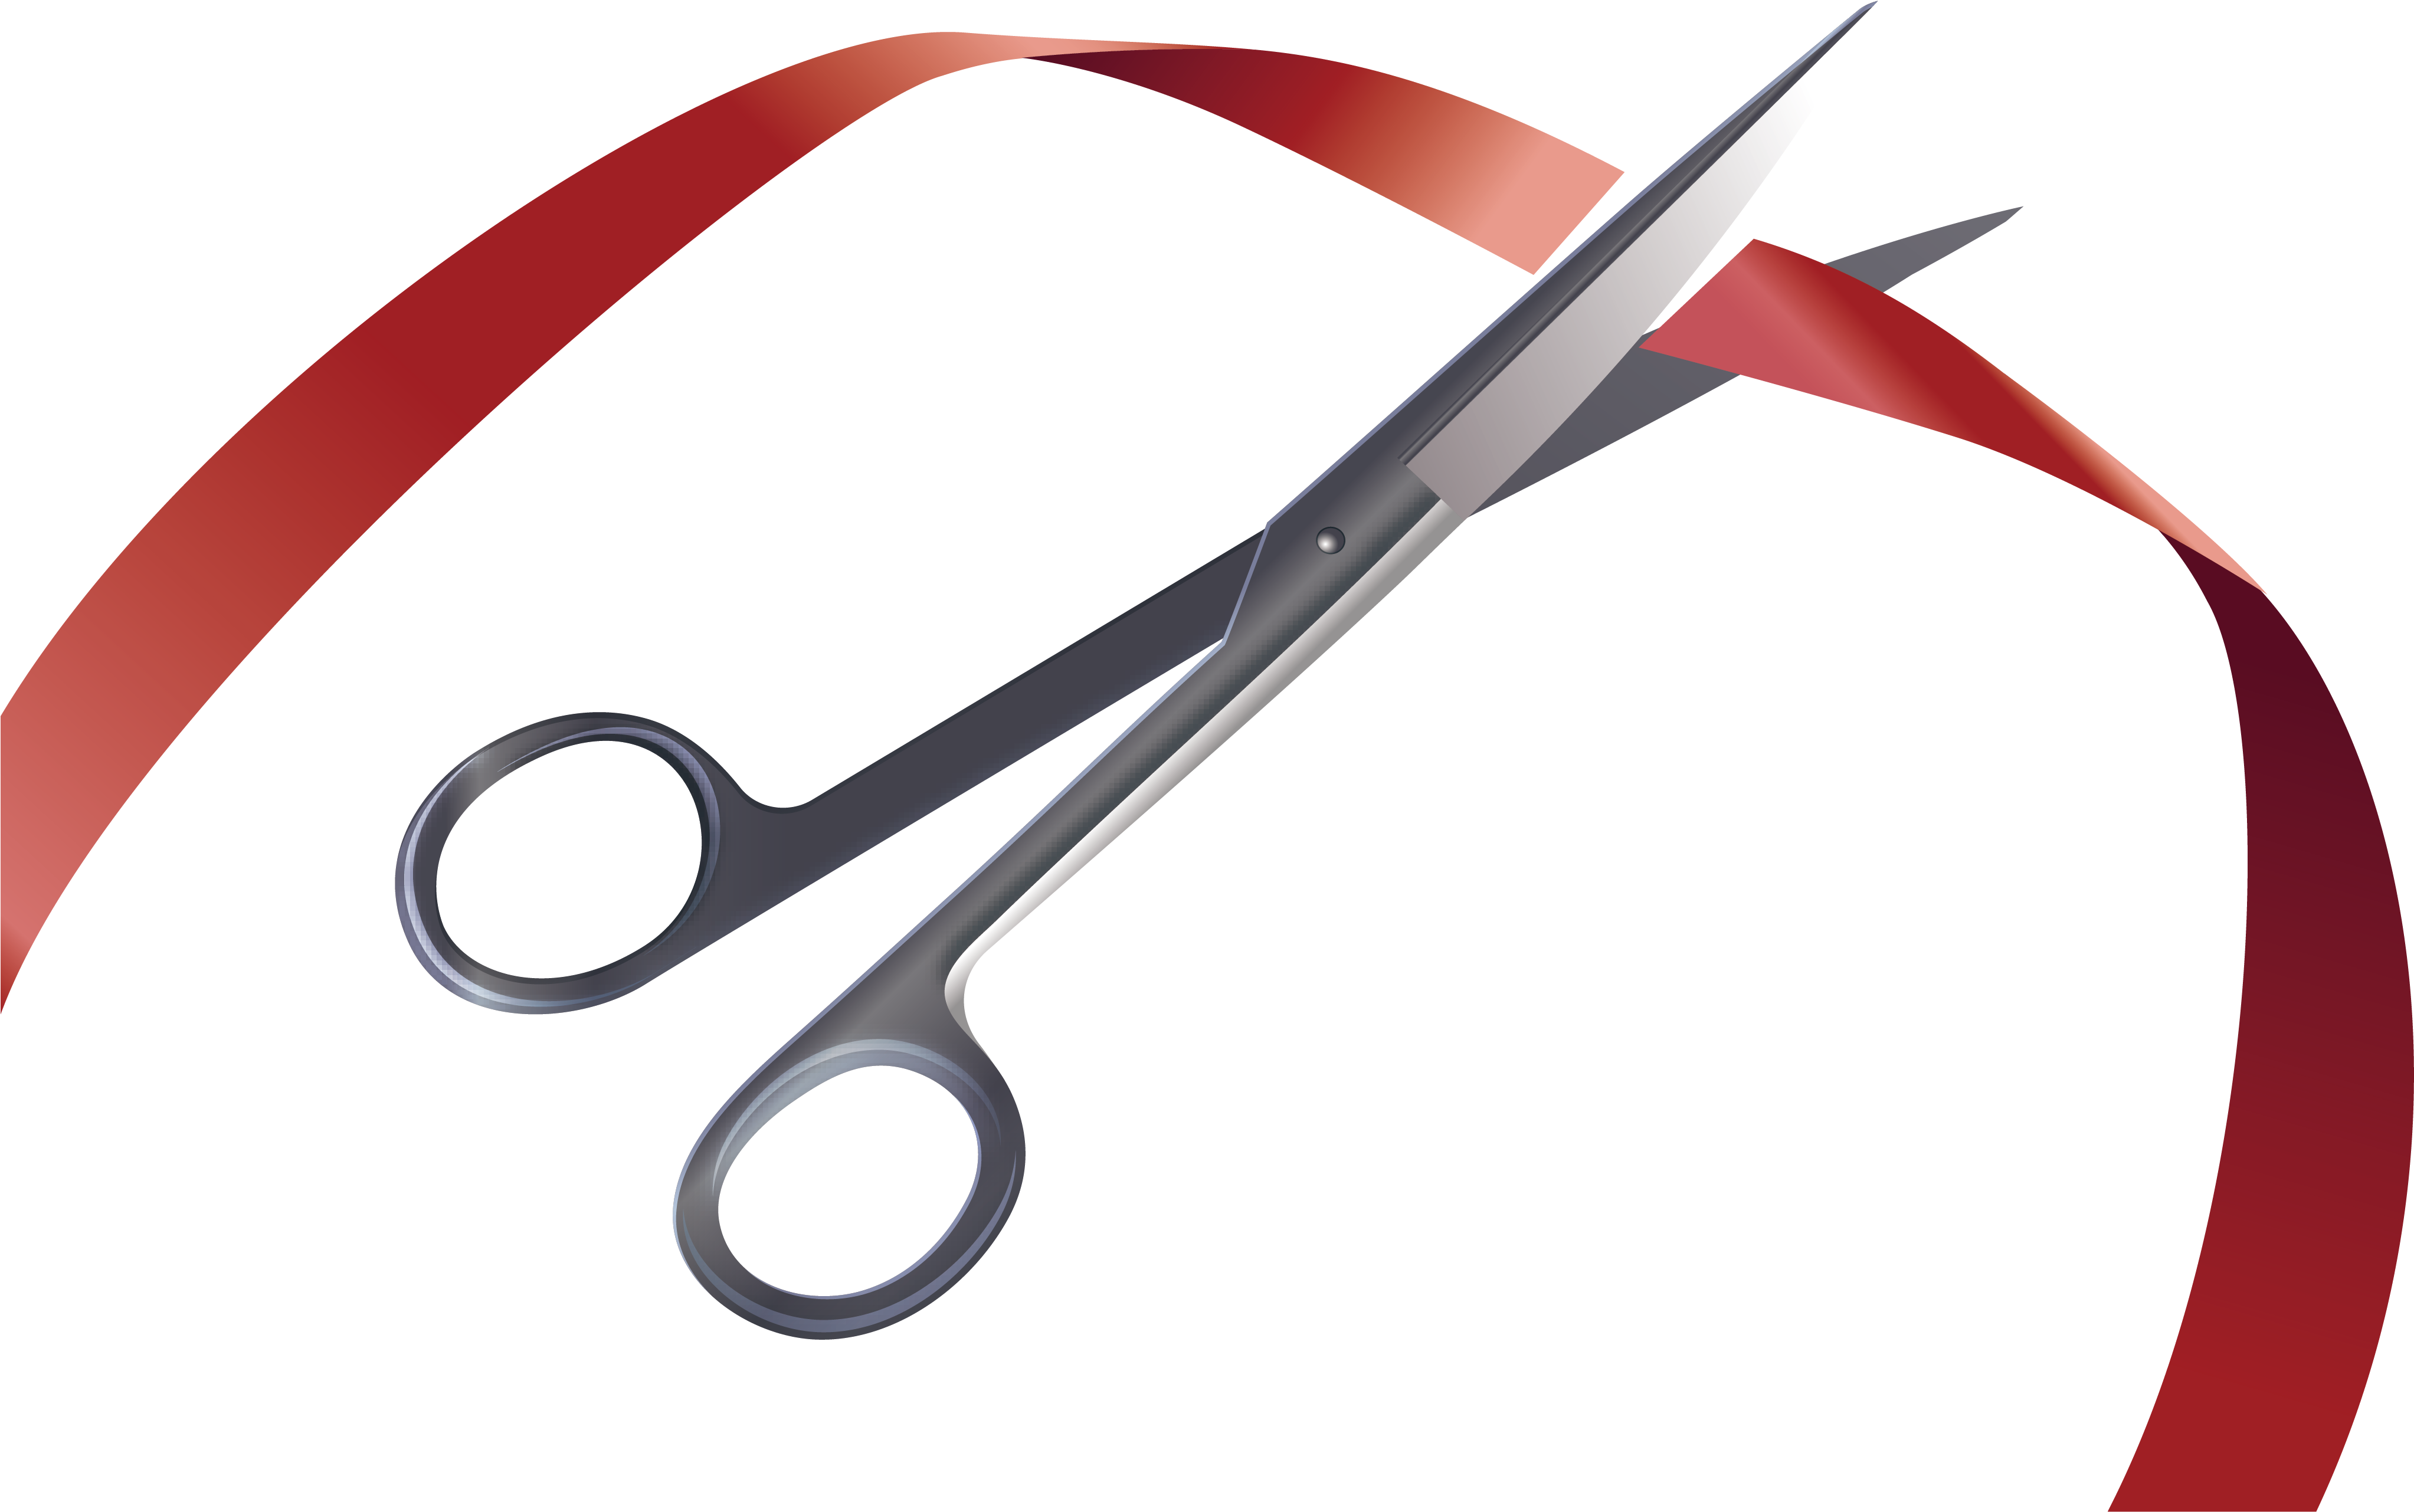 A Pair Of Scissors Cutting A Red Ribbon